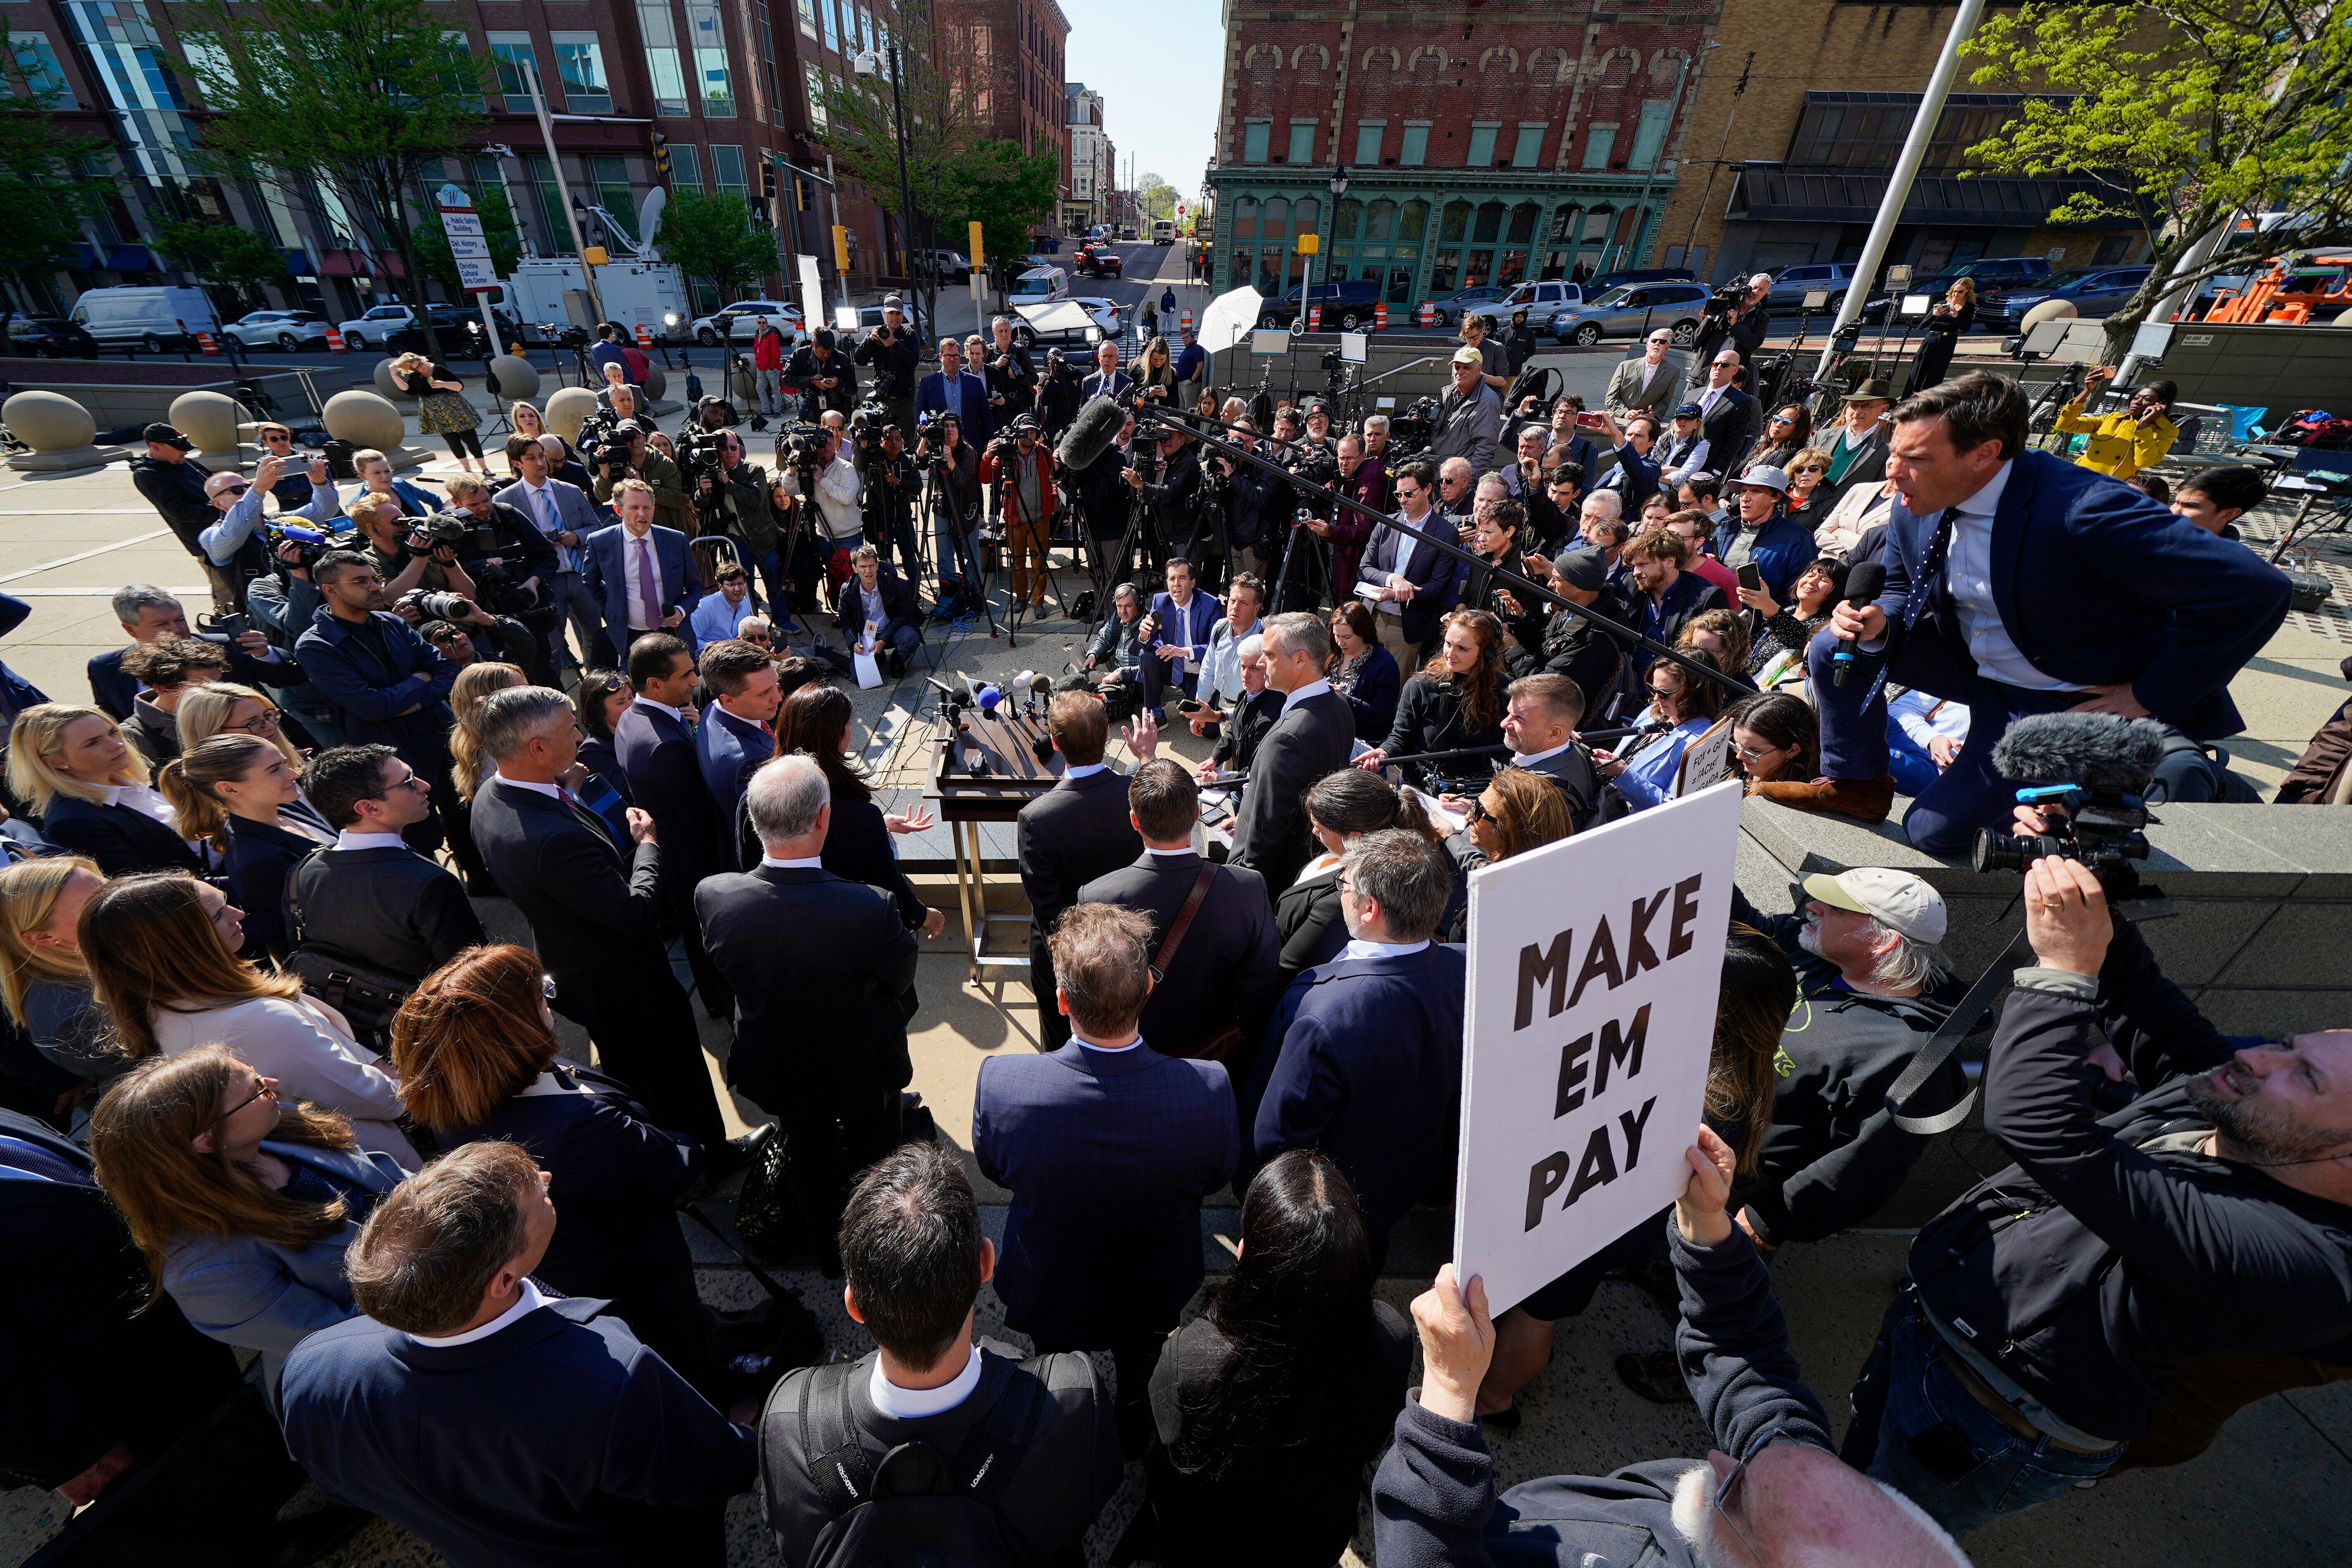 Reporters surround attorneys for Dominion Voting Systems during a news conference outside the New Castle County Courthouse in Wilmington, Delaware, after the defamation lawsuit against Fox News was settled on Tuesday, April 18, 2023